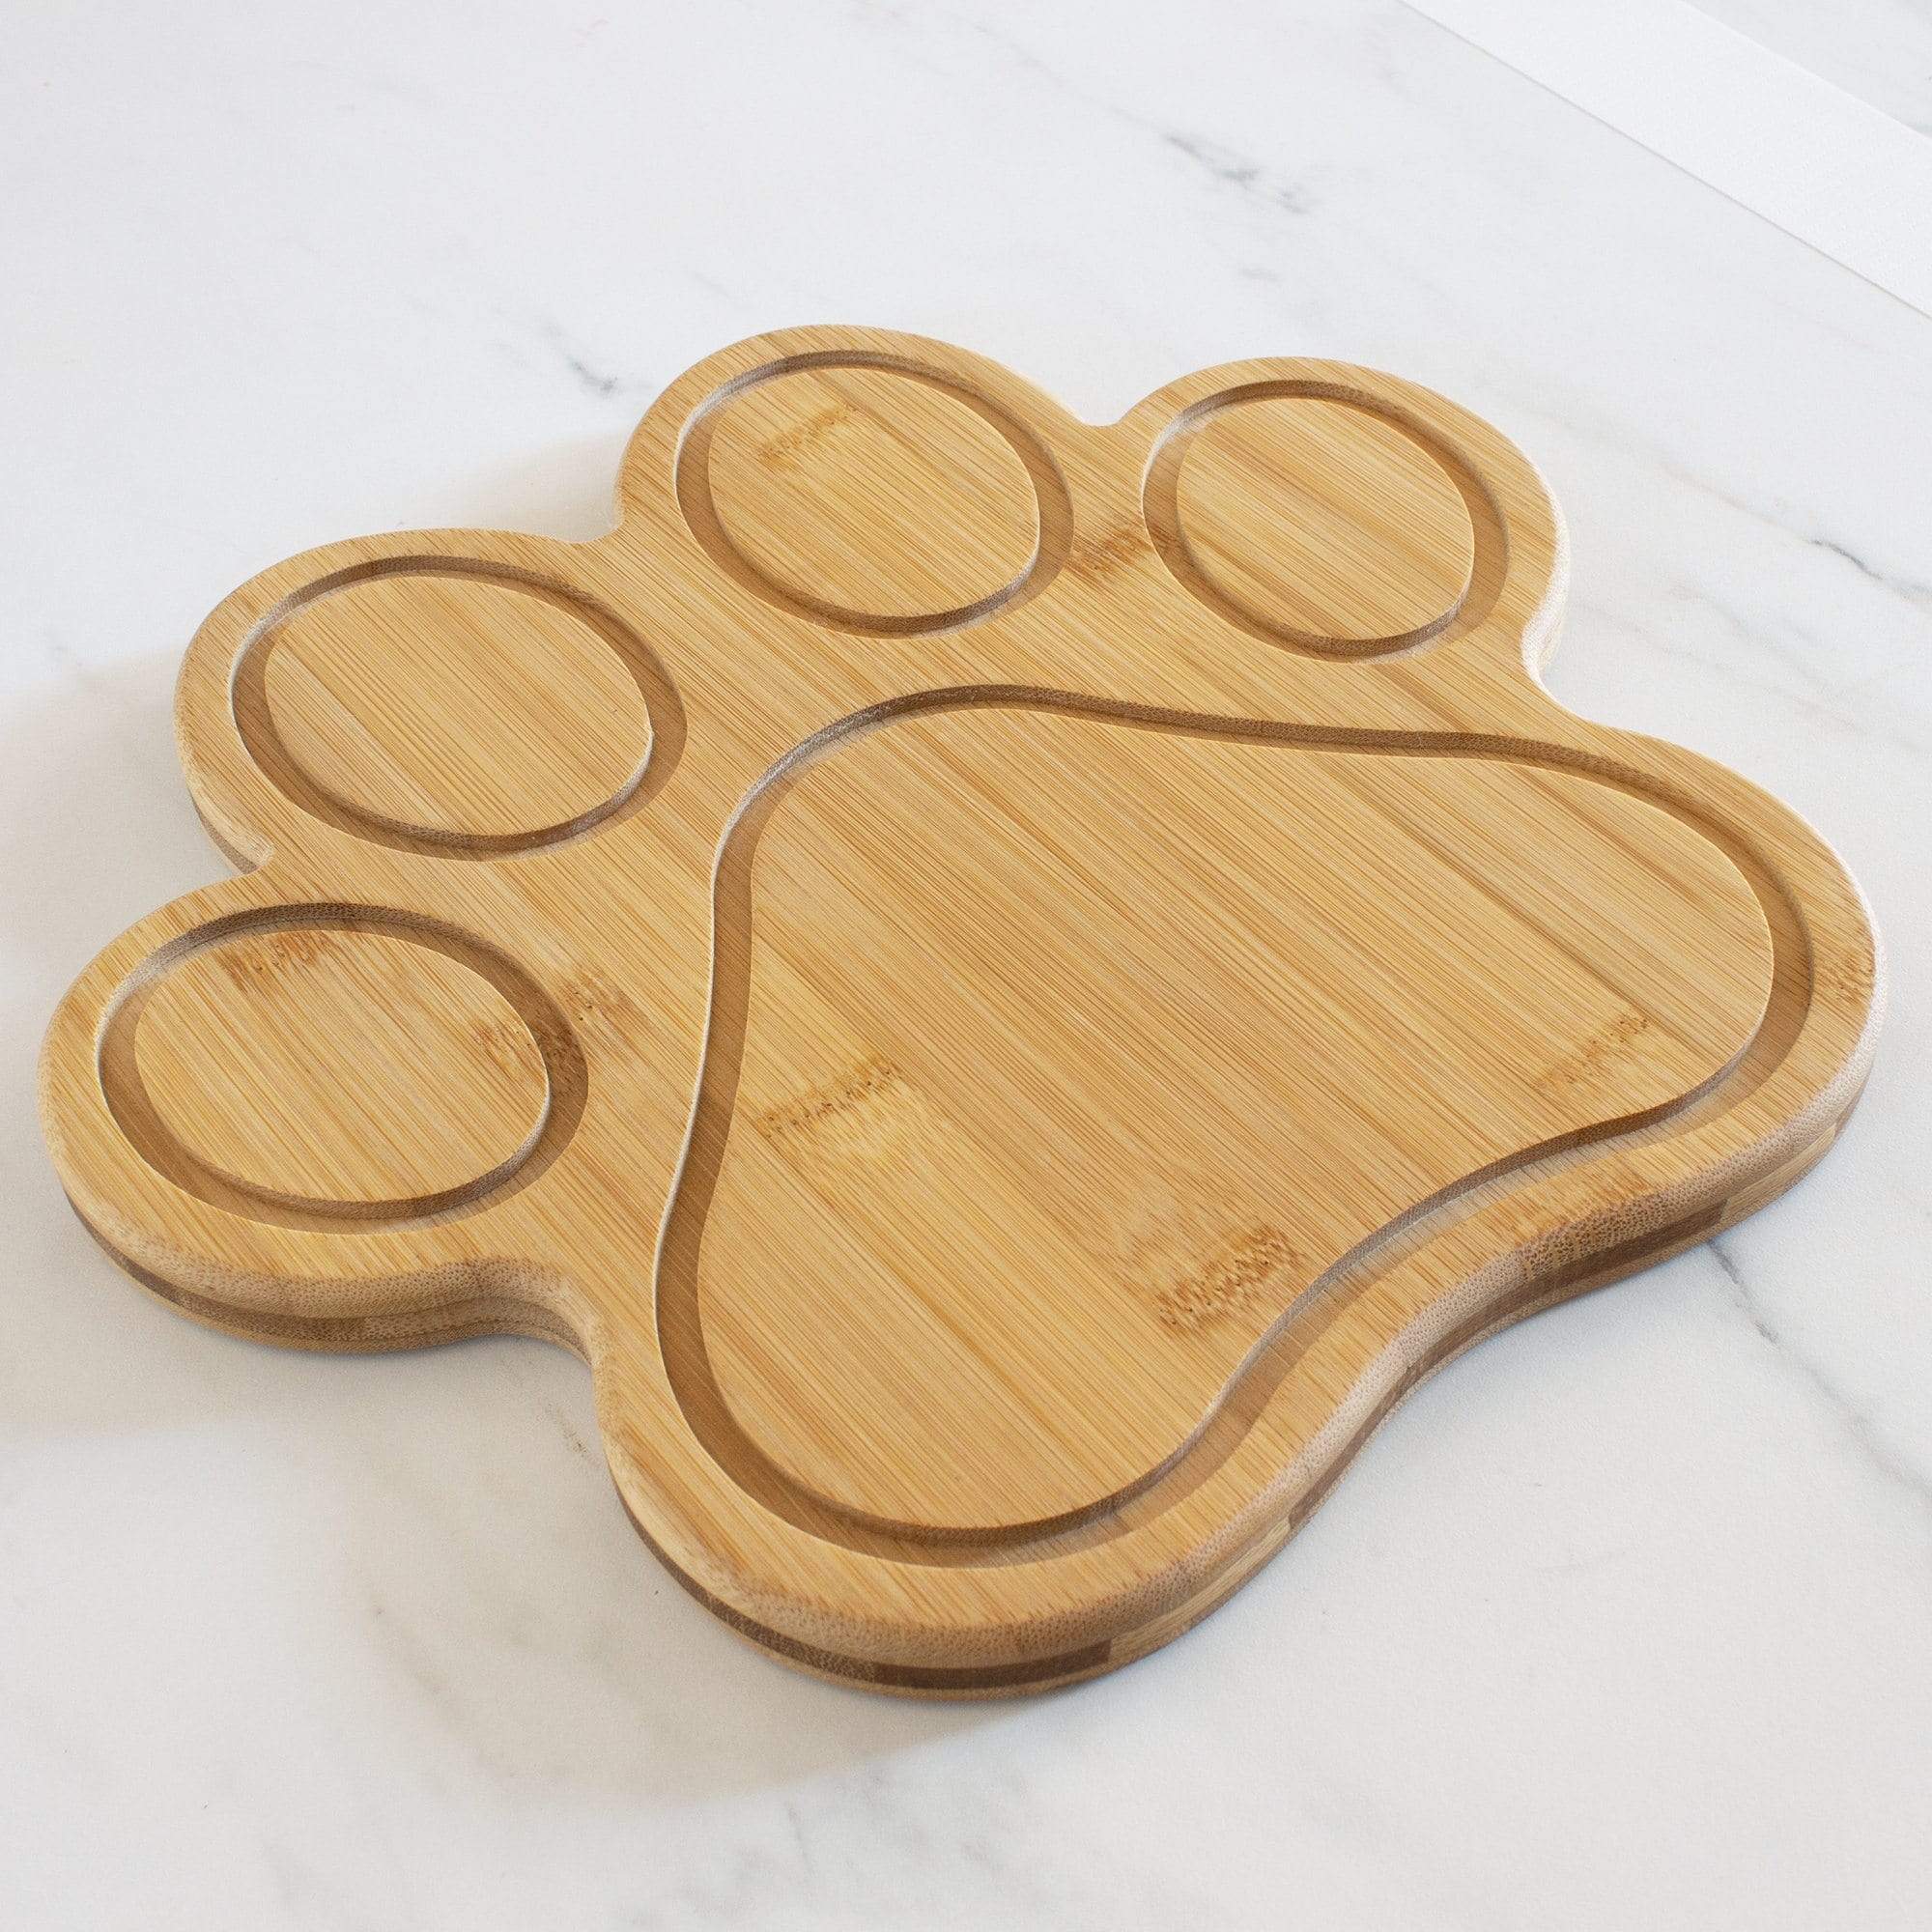 https://totallybamboo.com/cdn/shop/products/paw-shaped-serving-and-cutting-board-11-x-10-totally-bamboo-787452.jpg?v=1627996223